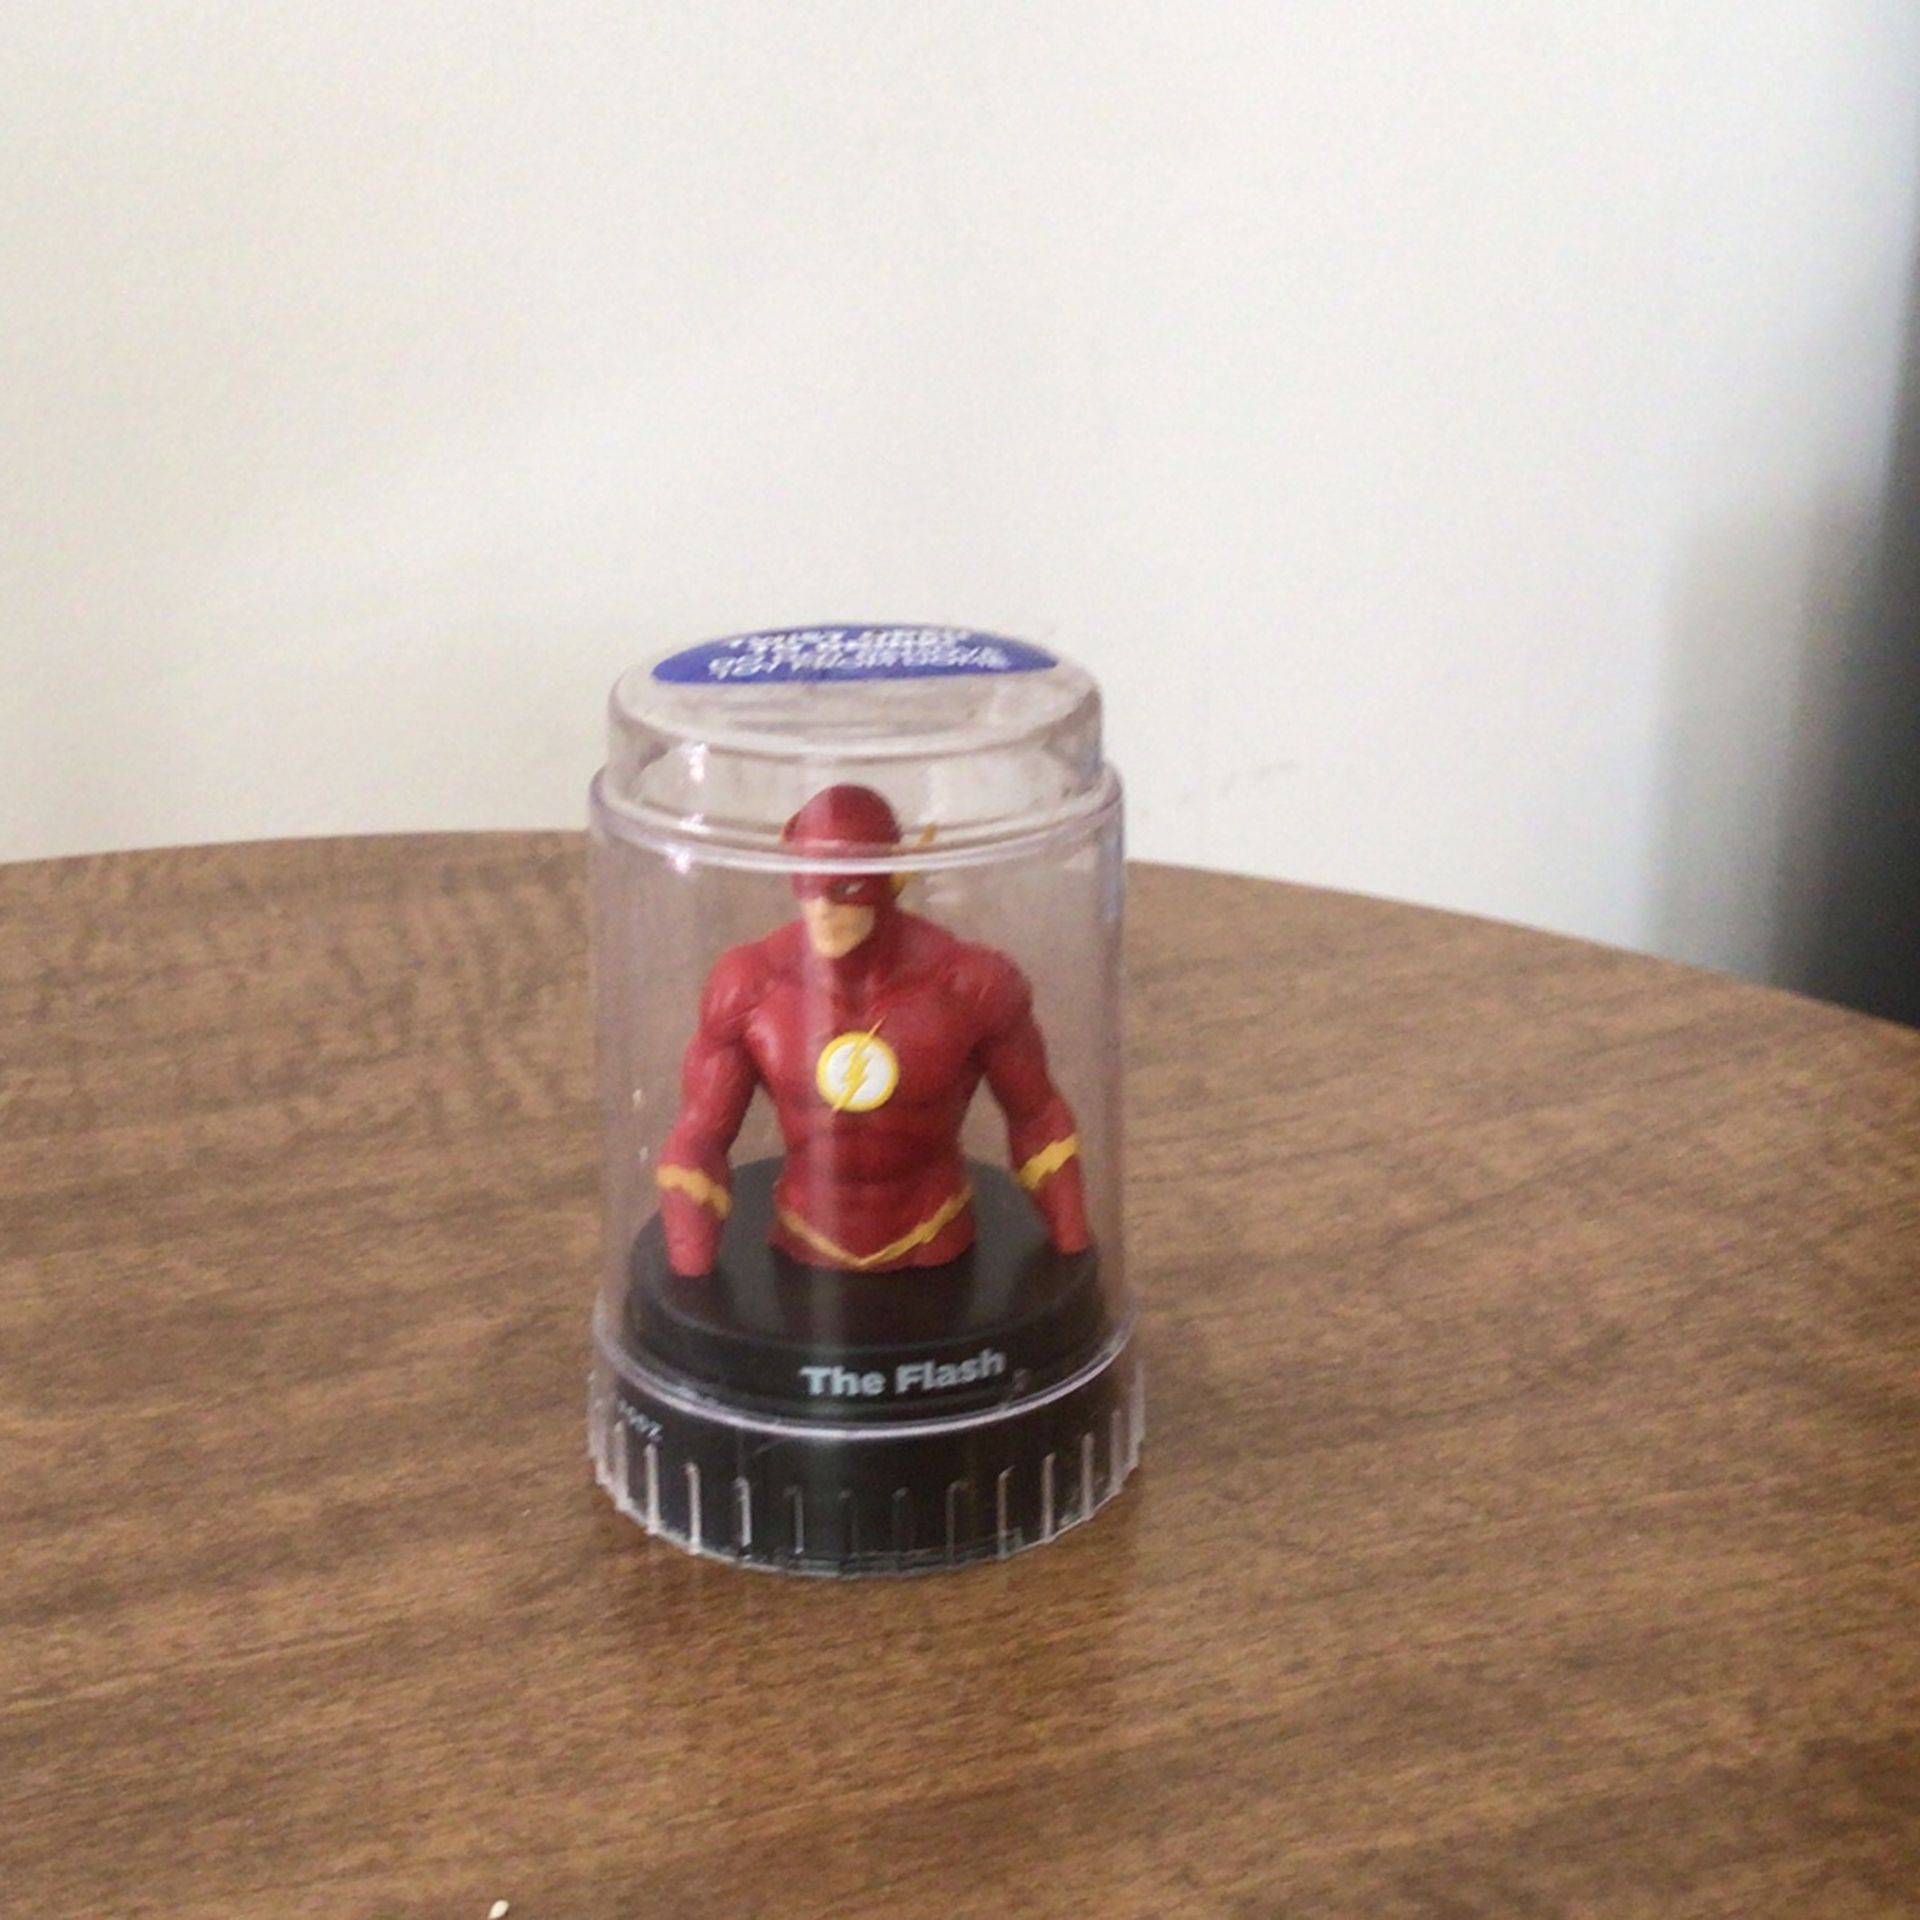 The Flash Dome Toy